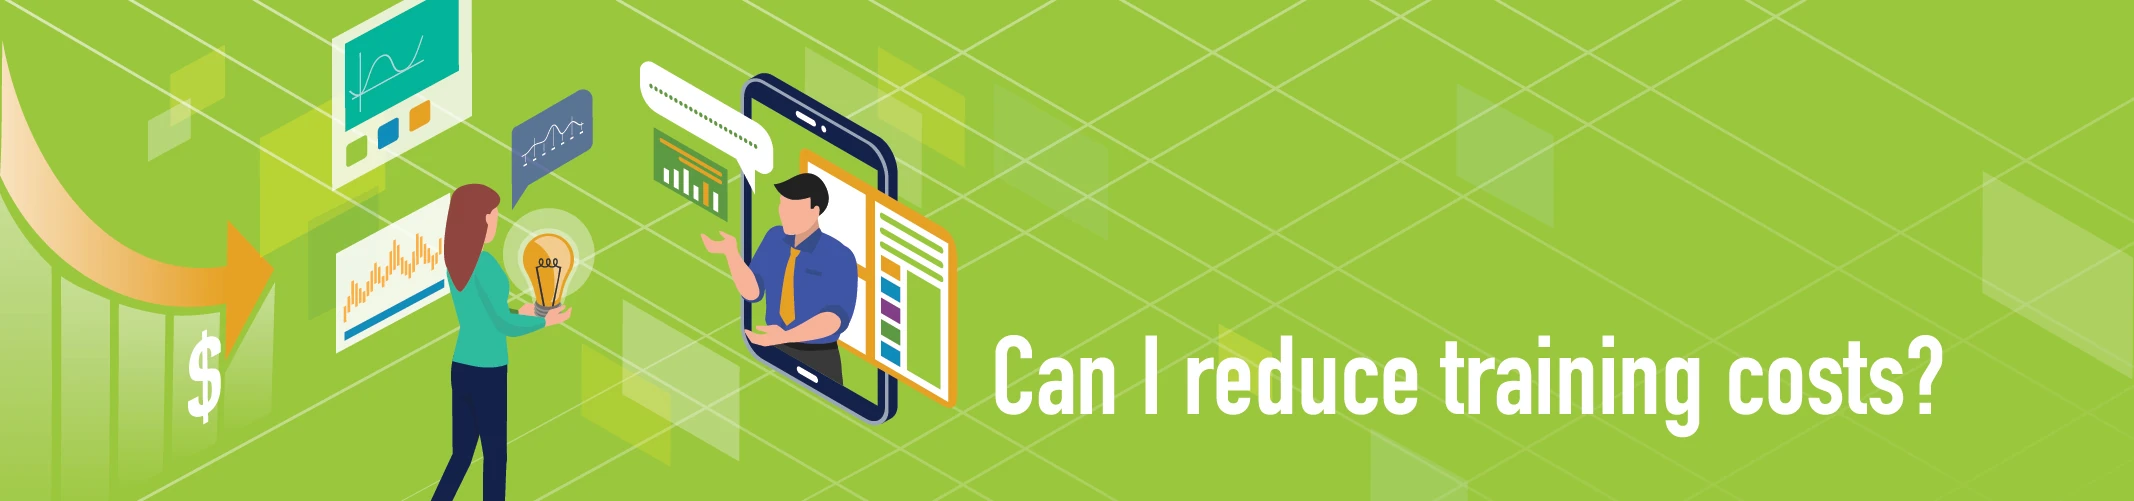 header imgage reads: Can I reduce training costs?